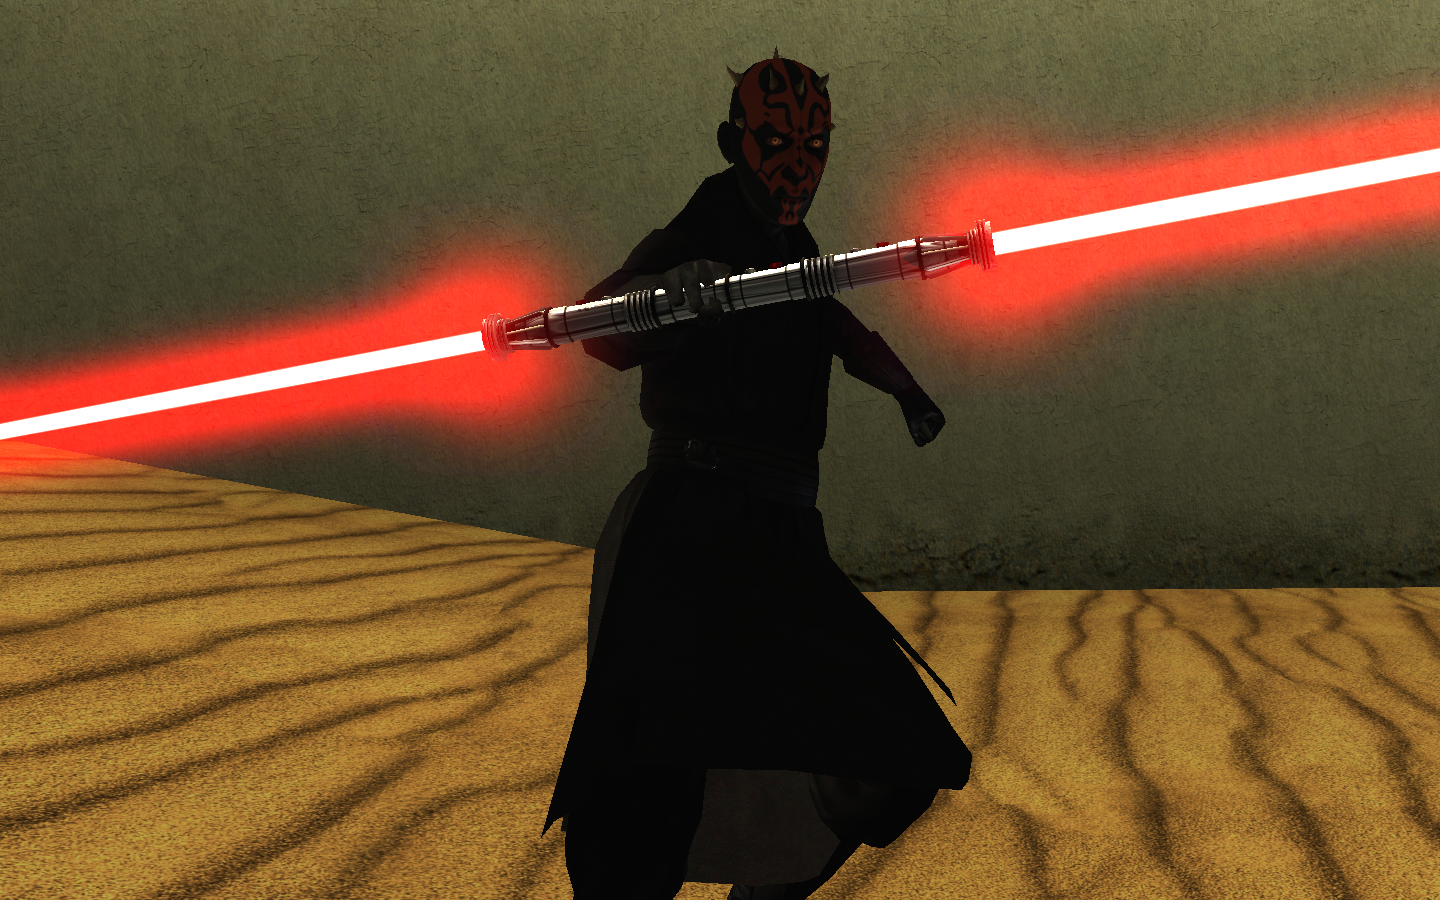 More information about "DT Darth Maul"